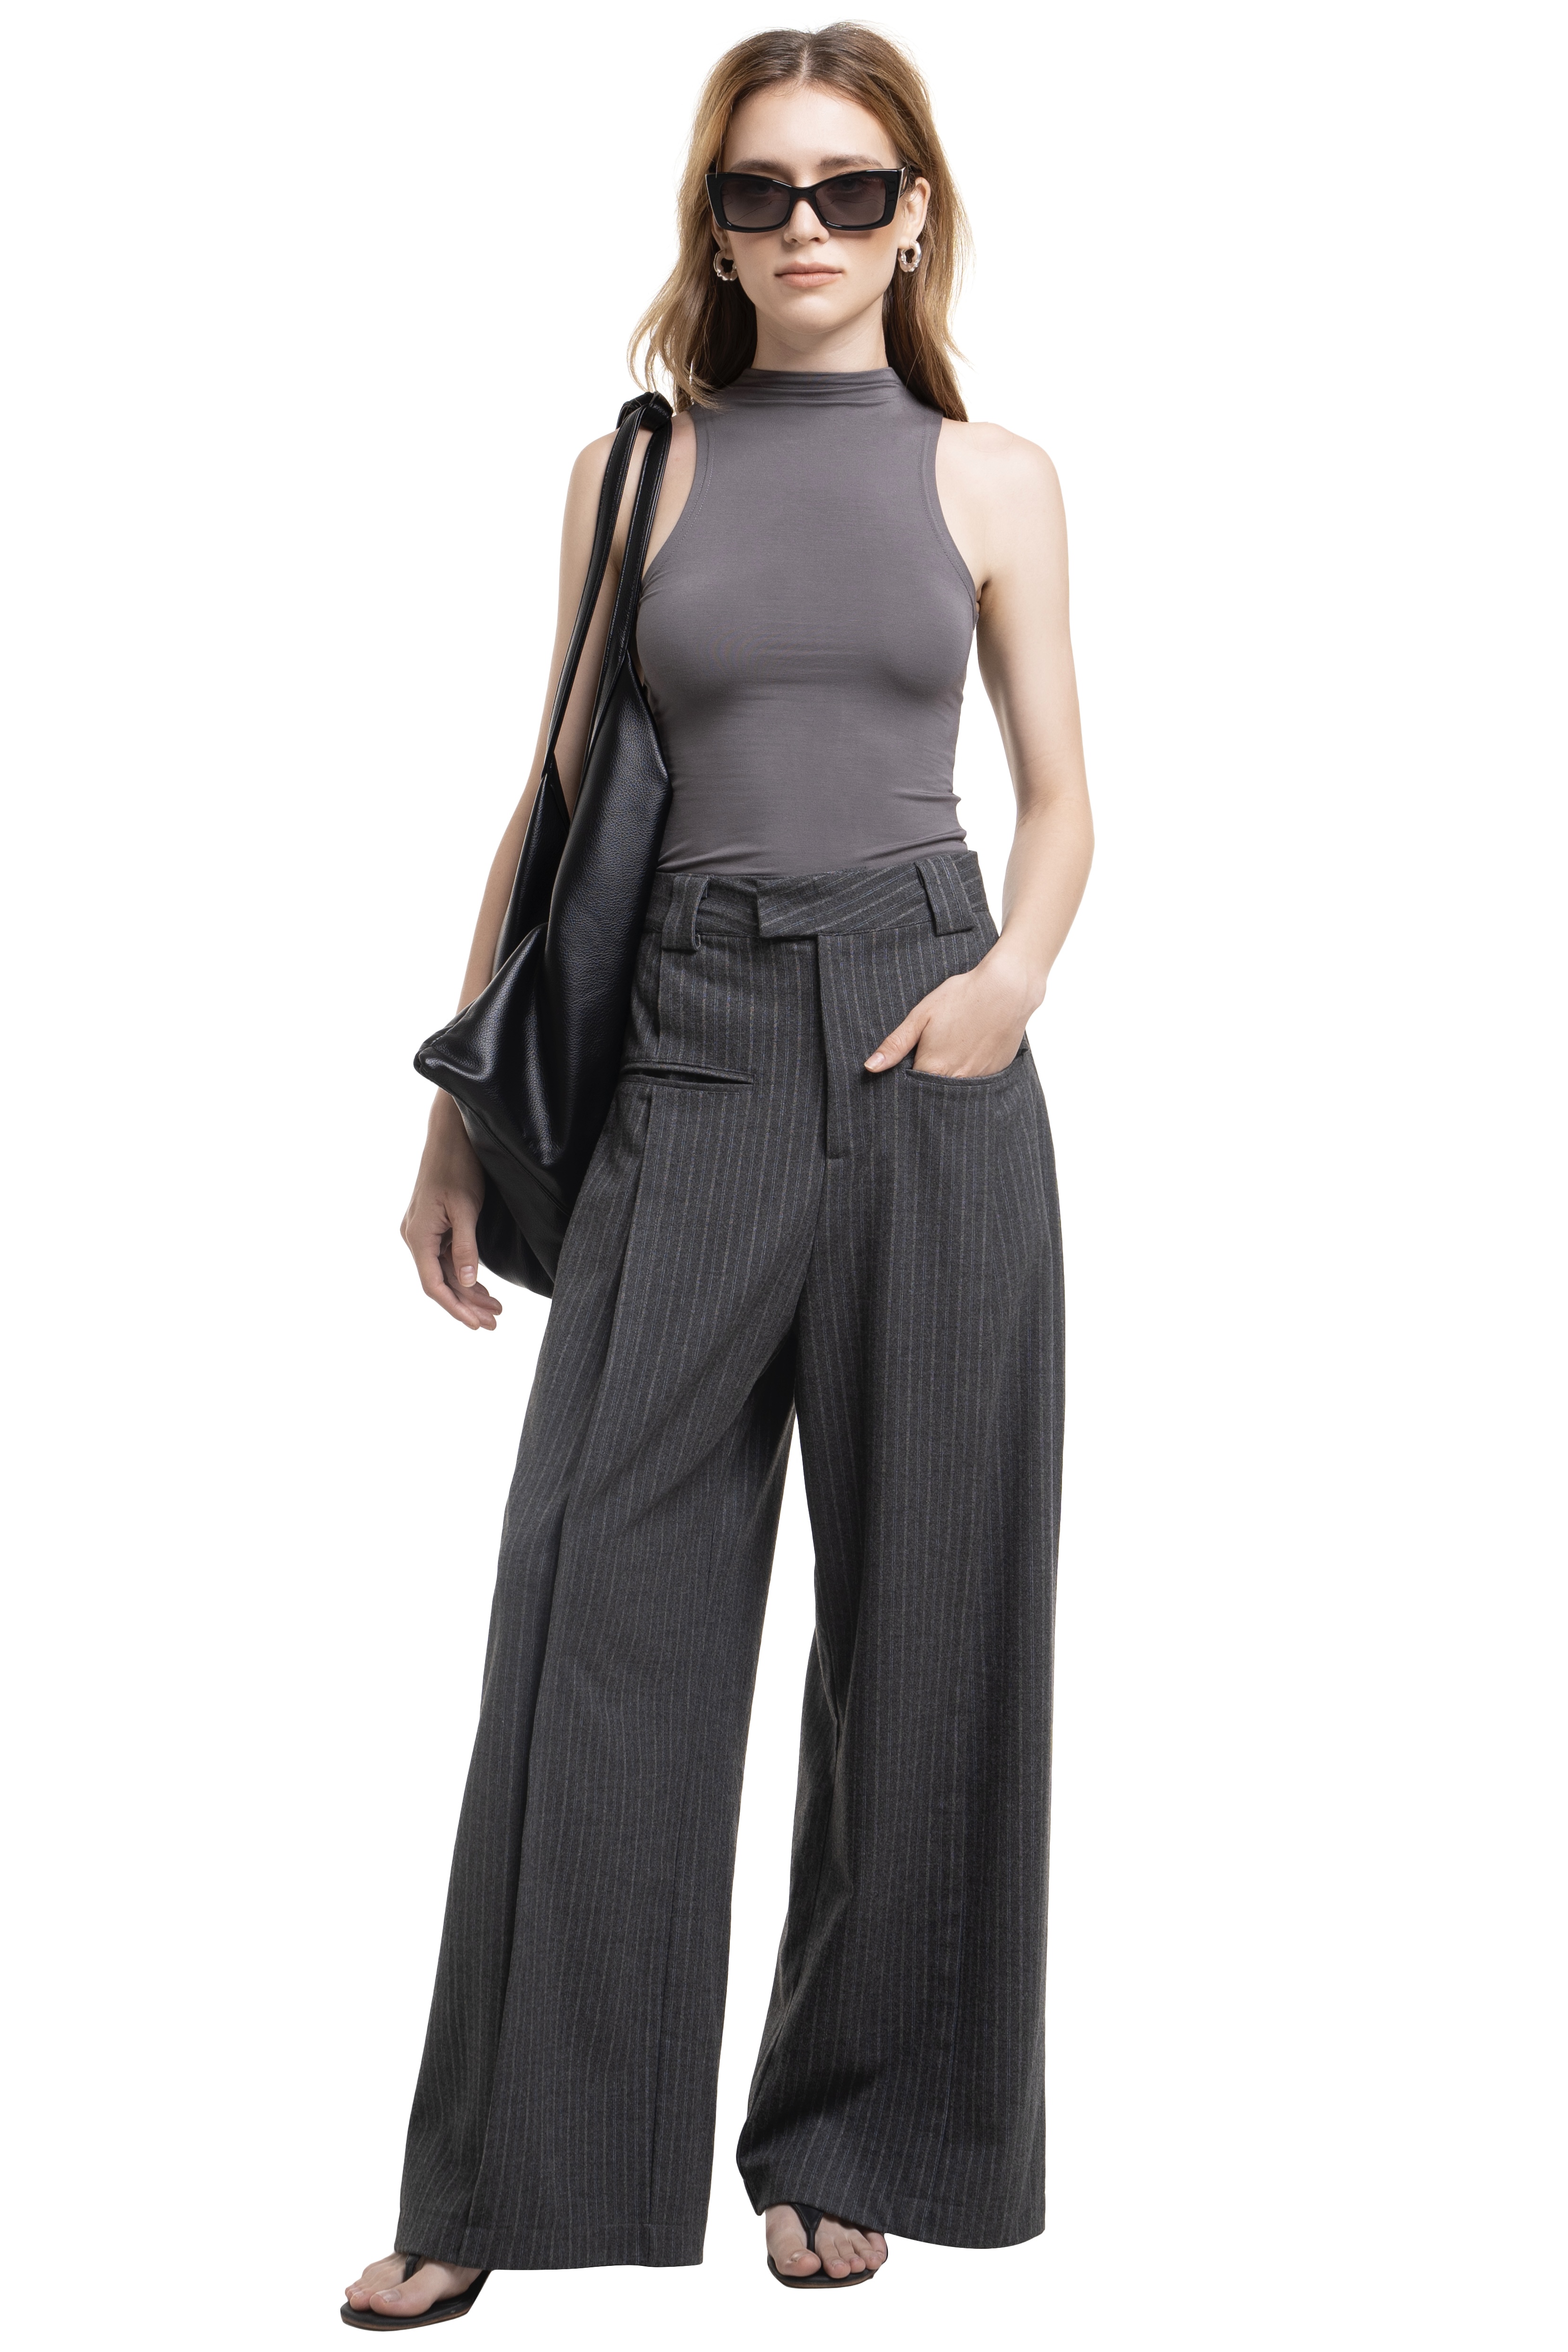 CLAIRE PANT - GREY STRIPED 